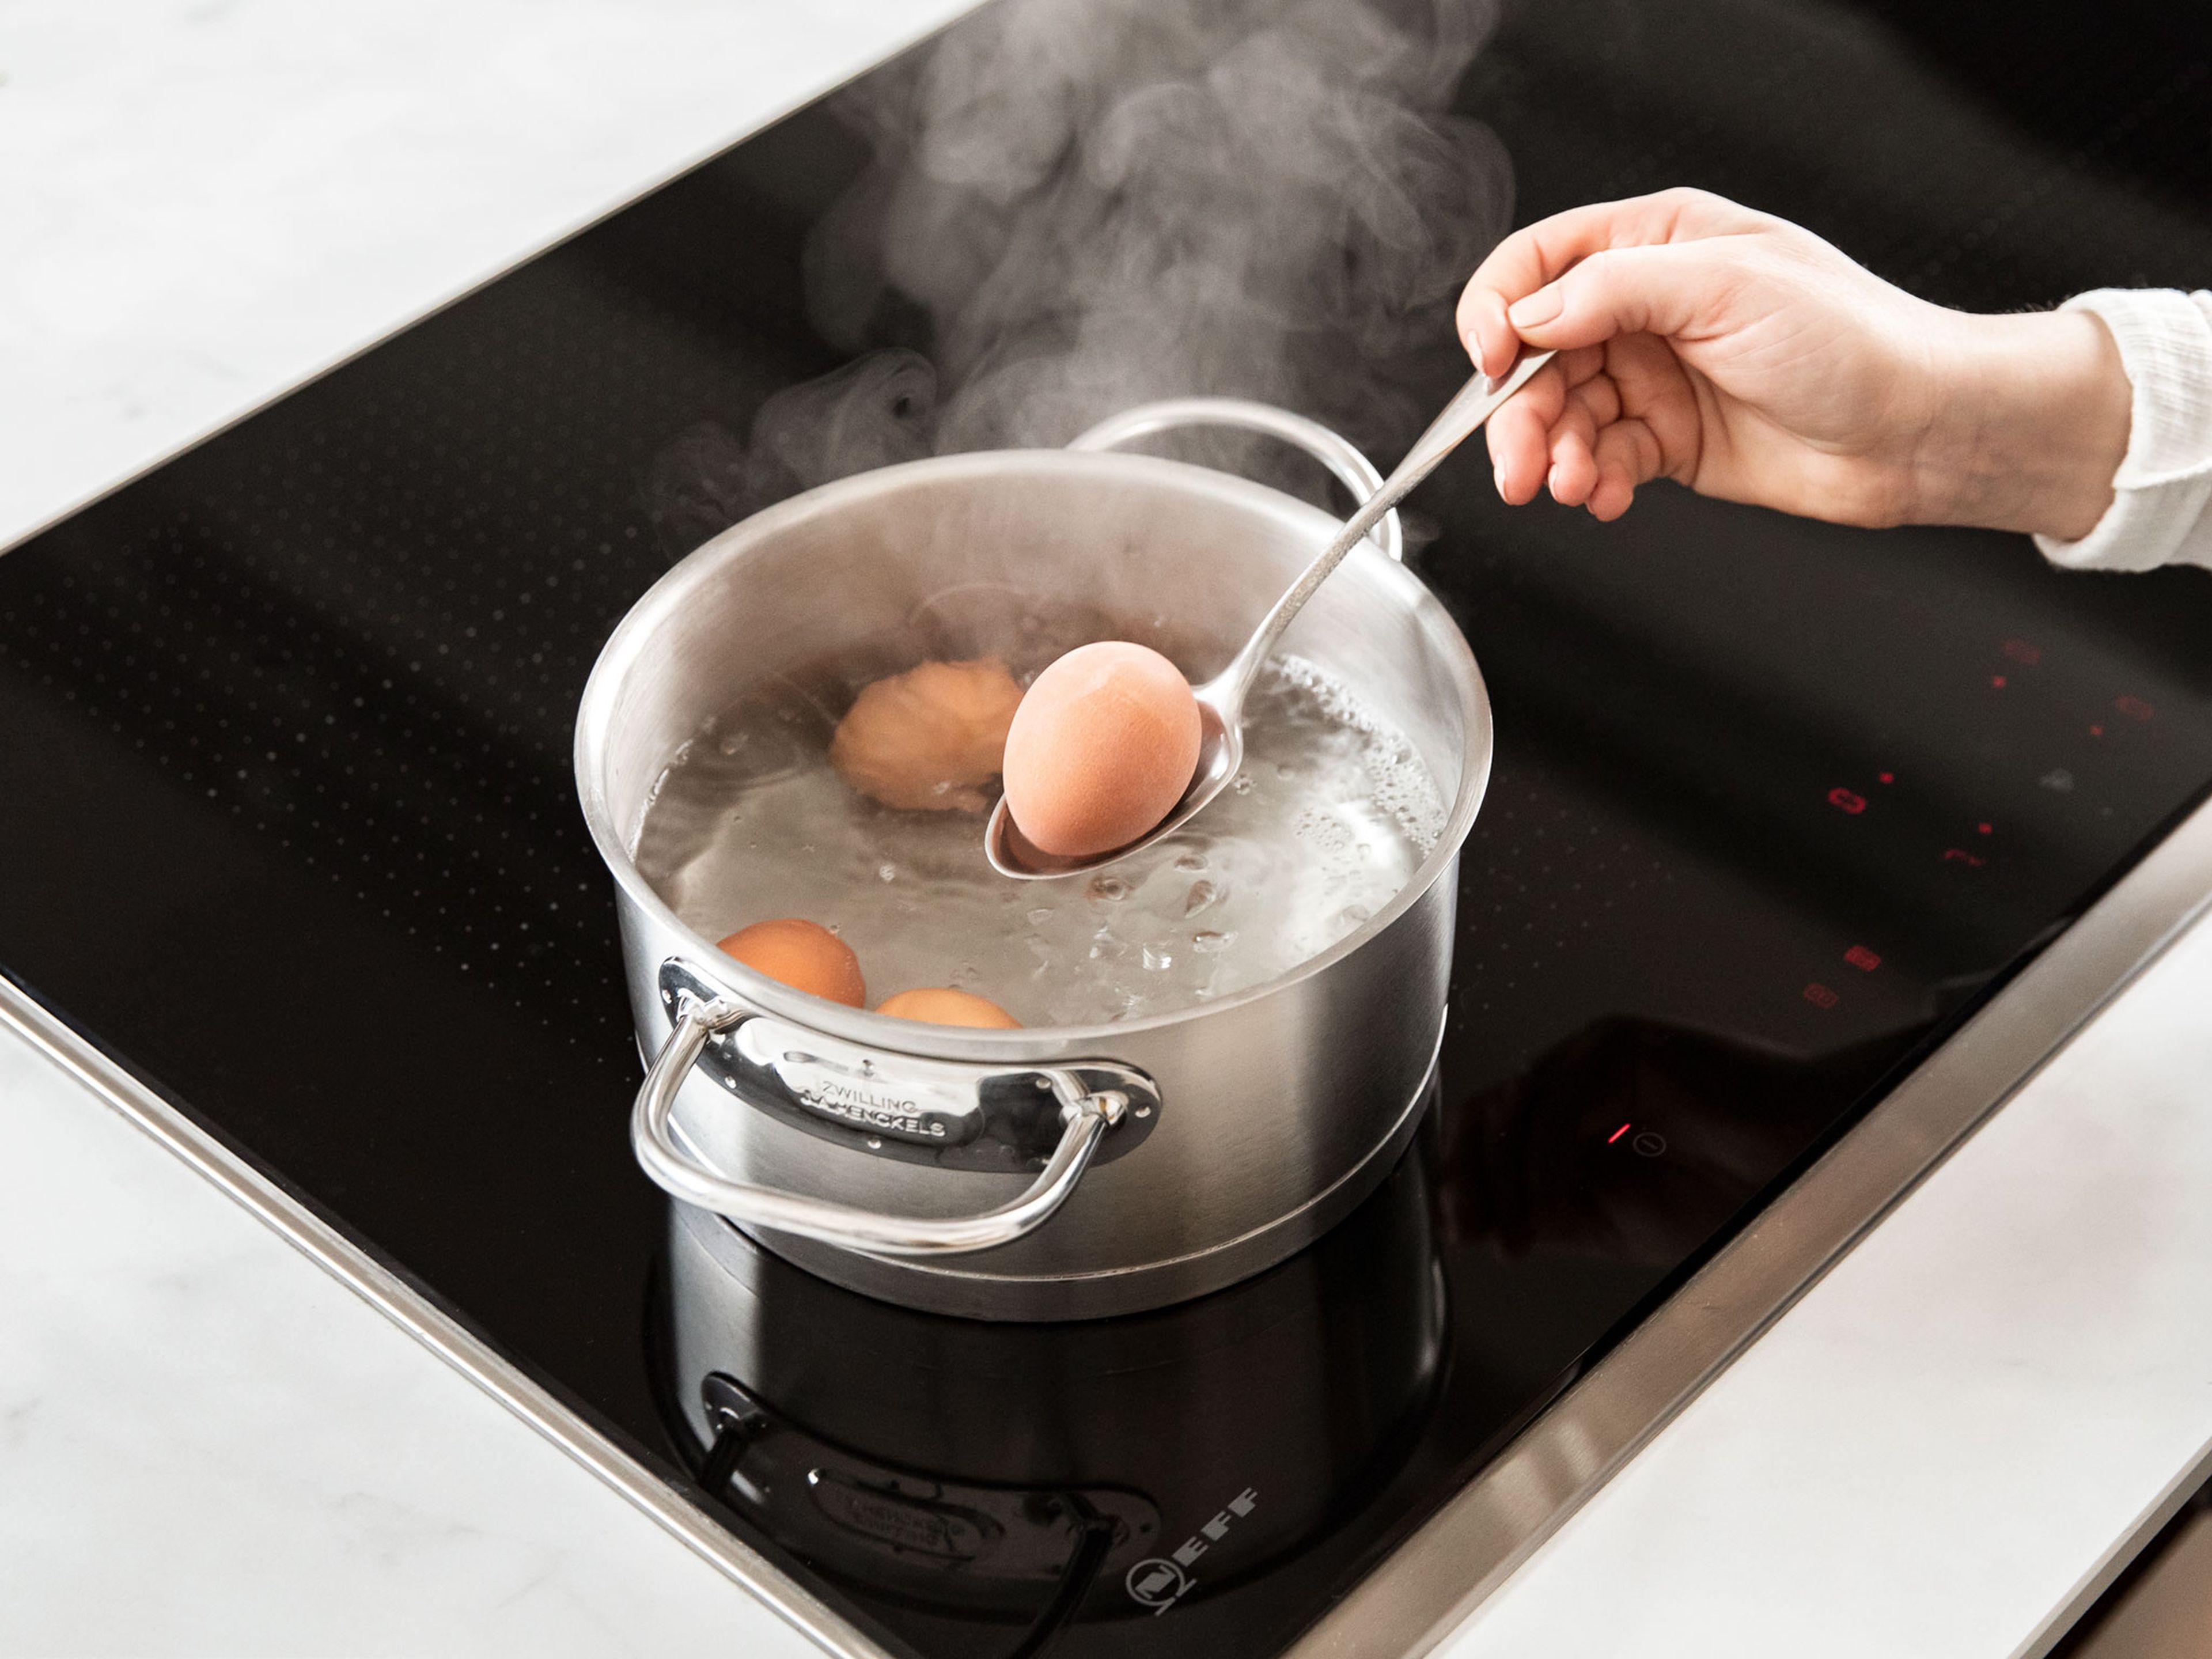 In the meantime, bring water in a pot to a boil. Gently lower the eggs into the boiling water and cover with a lid. Reduce heat and cook egg for approx. 9 min., until hard boiled and firm. Remove from heat and fill pot with ice water.